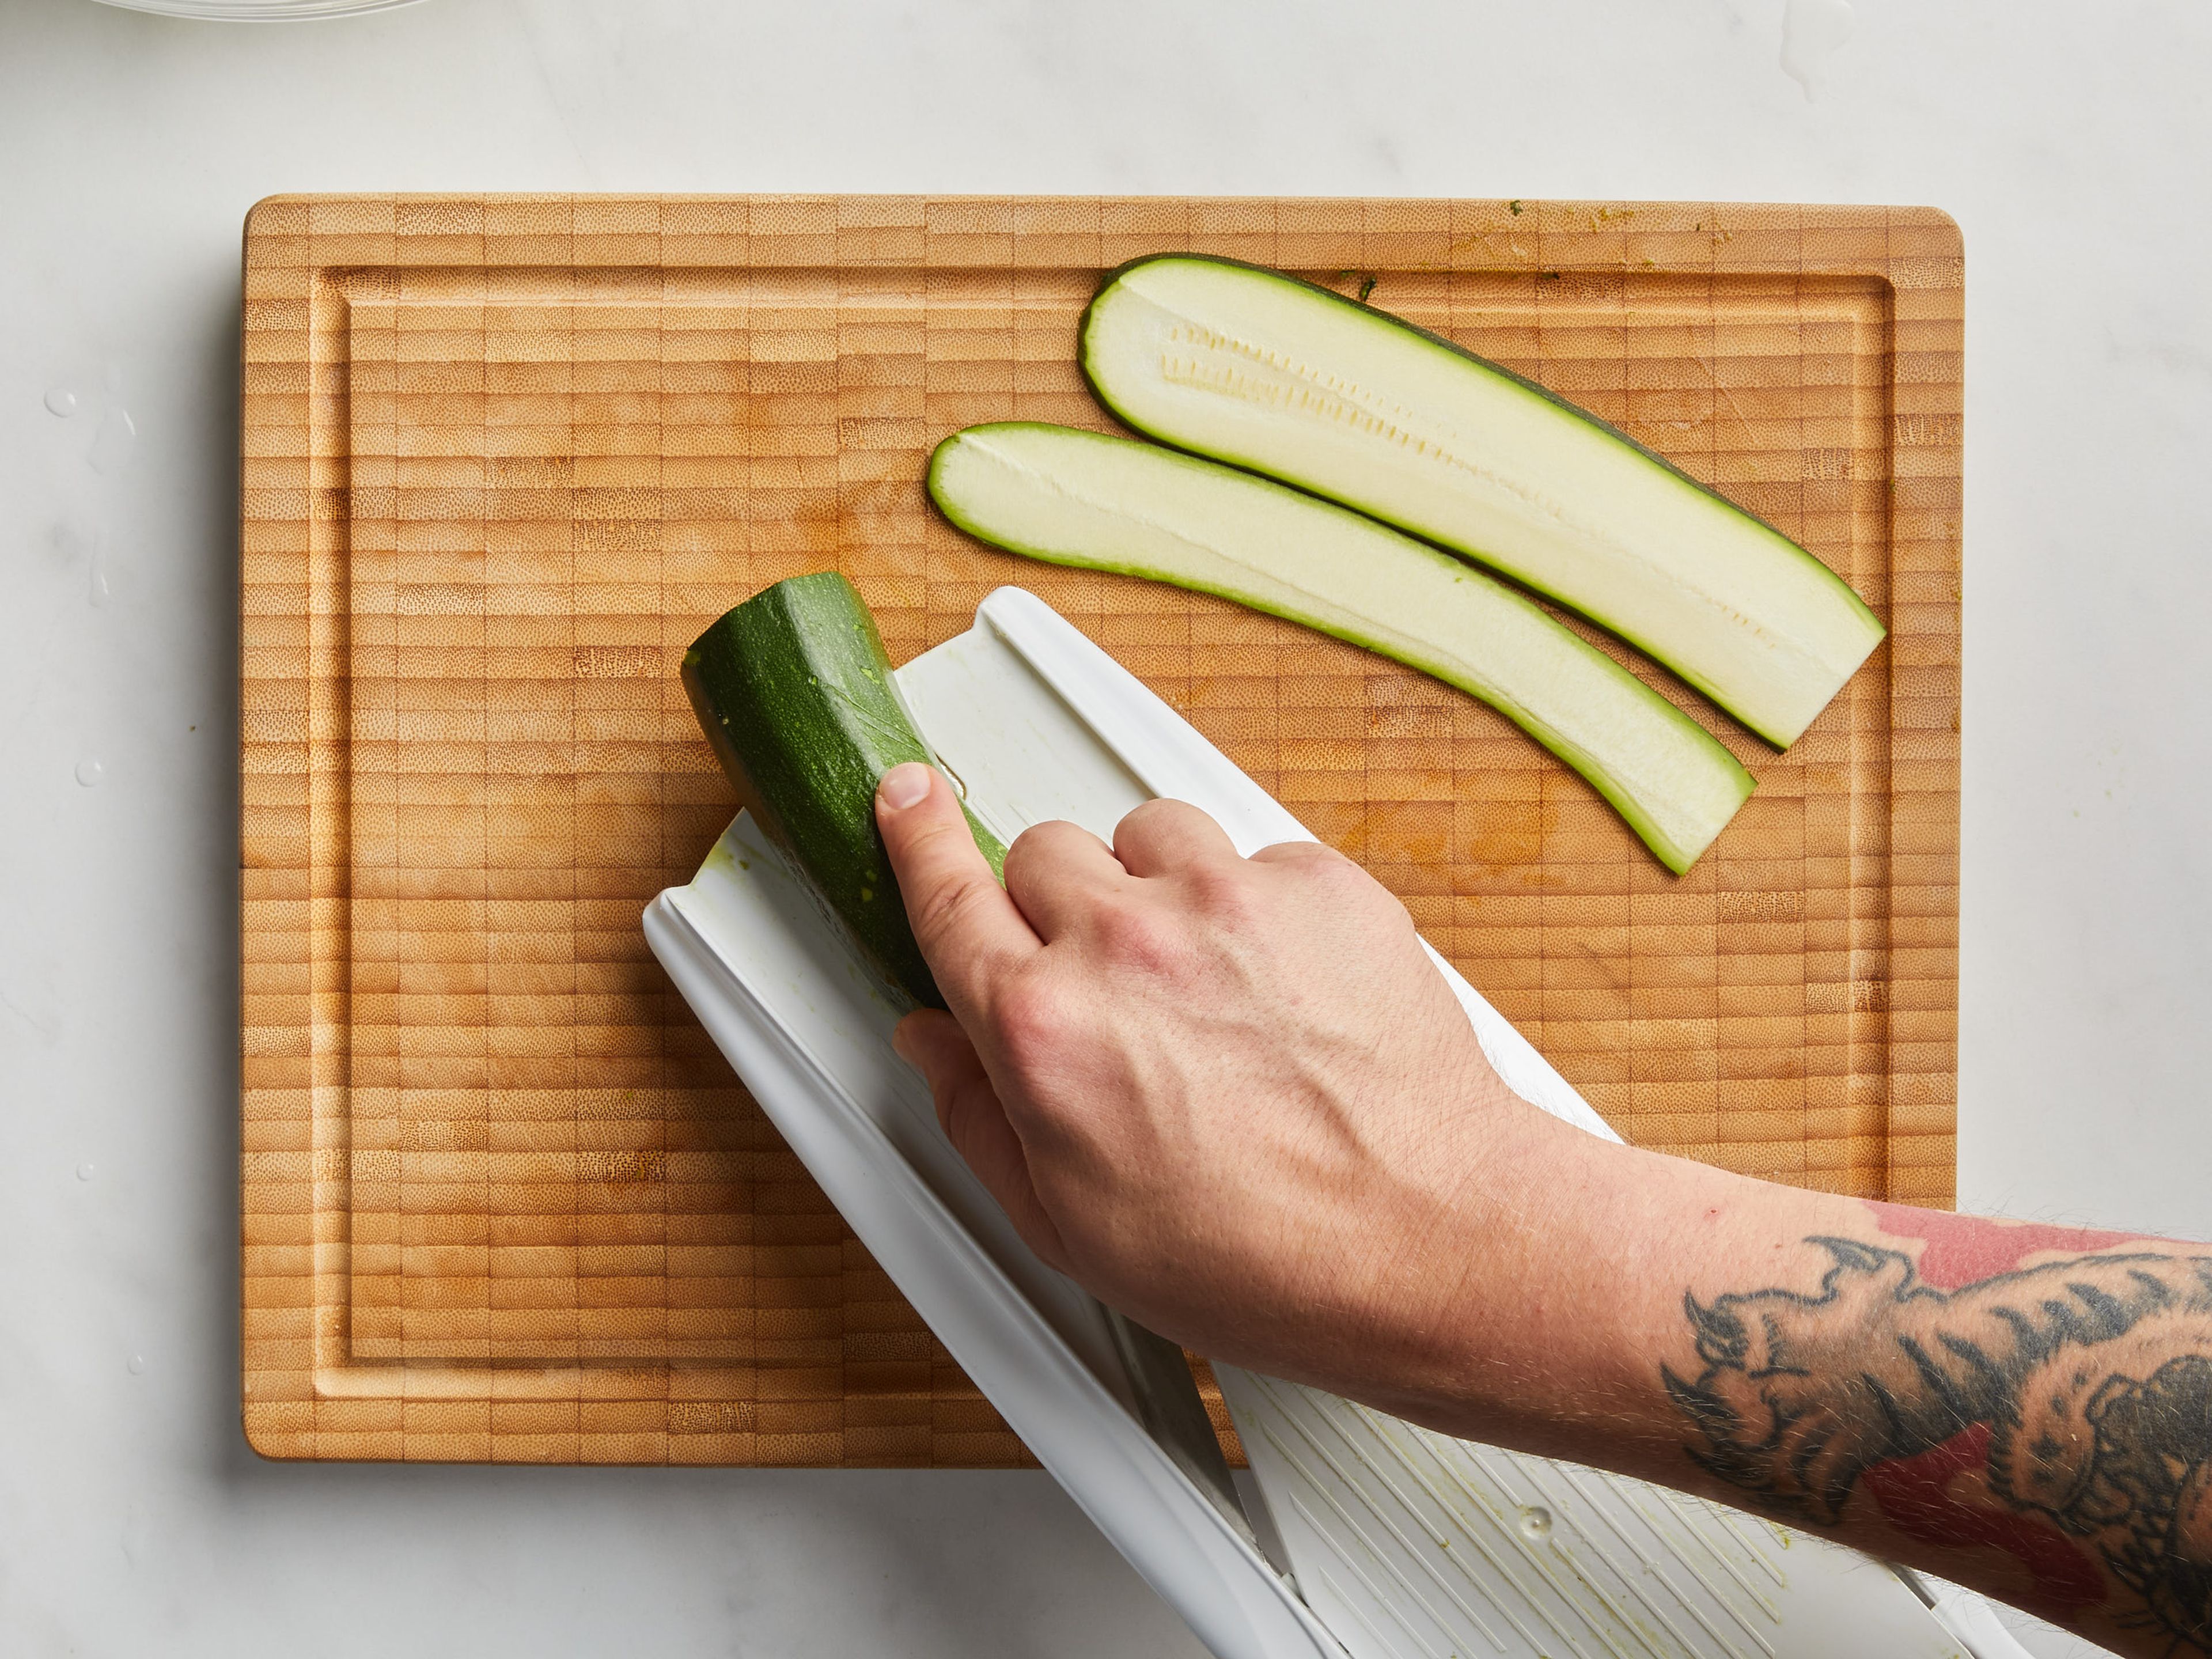 Preheat the grill, if using. Place skewers in hot water and soak for at least 10 min. In the meantime, slice the zucchini lengthwise with a knife, a mandoline or a wide peeler into slices about 3 mm / 0.1 in. thin. In a bowl, coat the zucchini slices with a little salt. Cut the halloumi into 24 equal-sized cubes. Each cube should be about 2.5 x 2.5 cm (1 x 1 in.). Slice the mint chiffonade, creating thin ribbons.